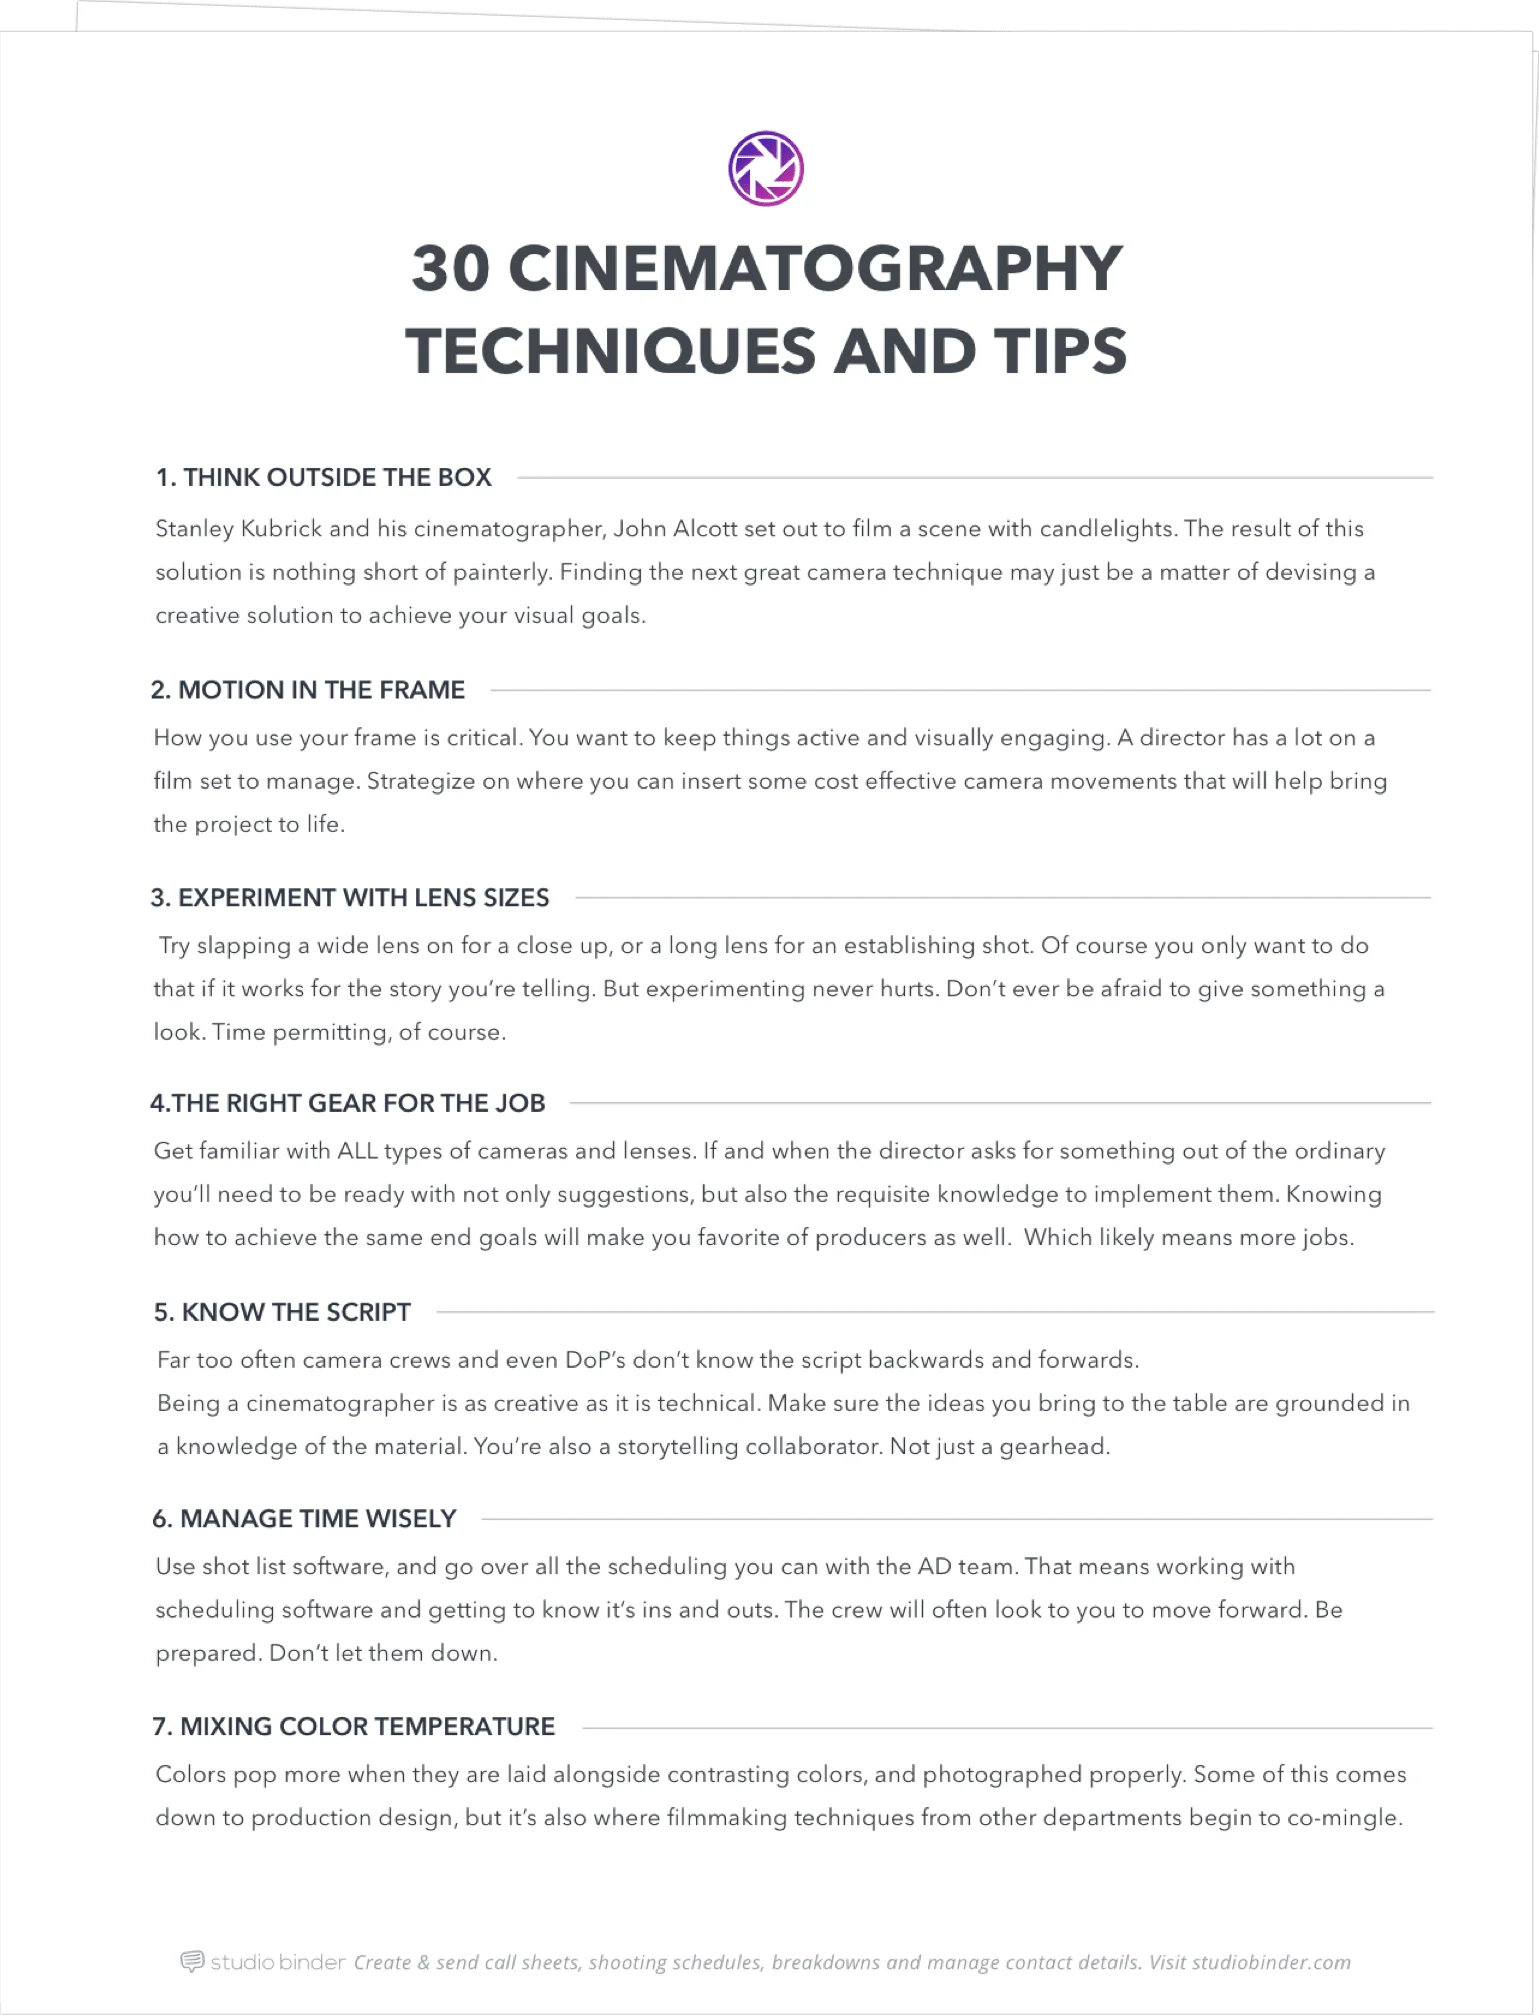 30 Cinematography Techniques and TIps - Exit Intent Full Page - StudioBinder